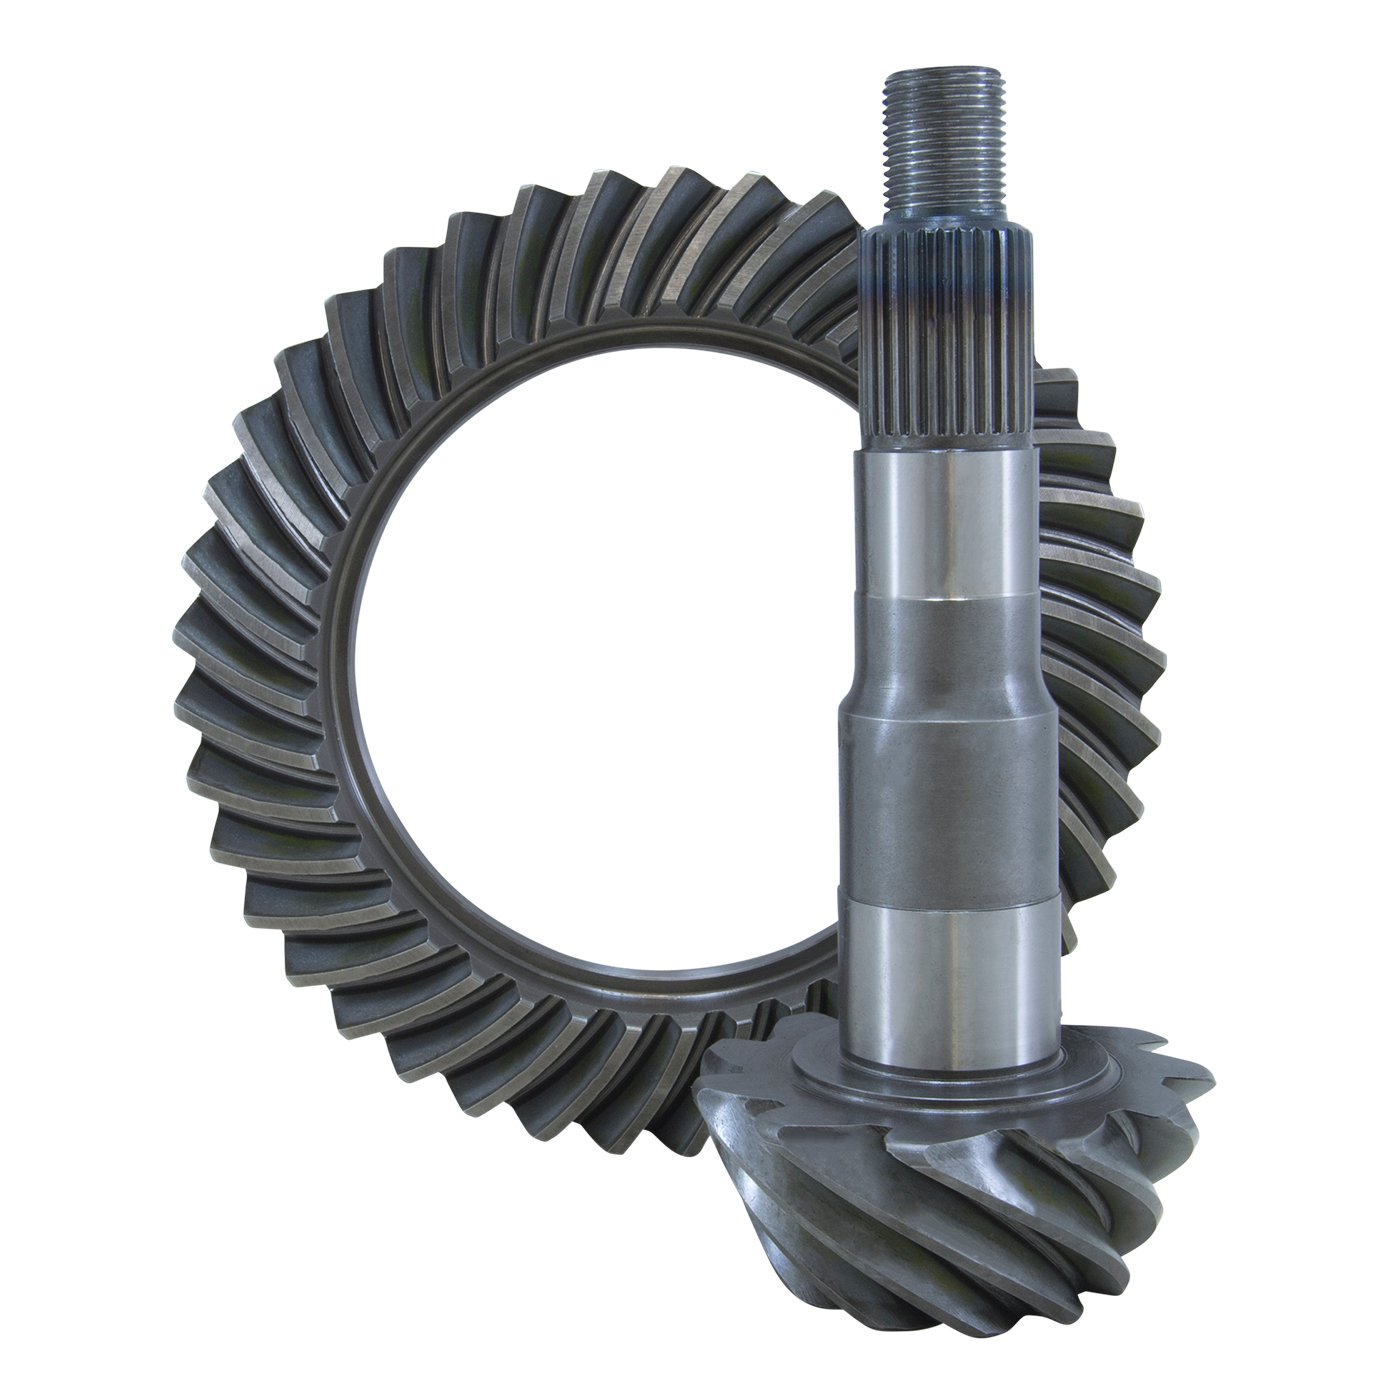 USA Standard 36058 Replacement Ring & Pinion Gear